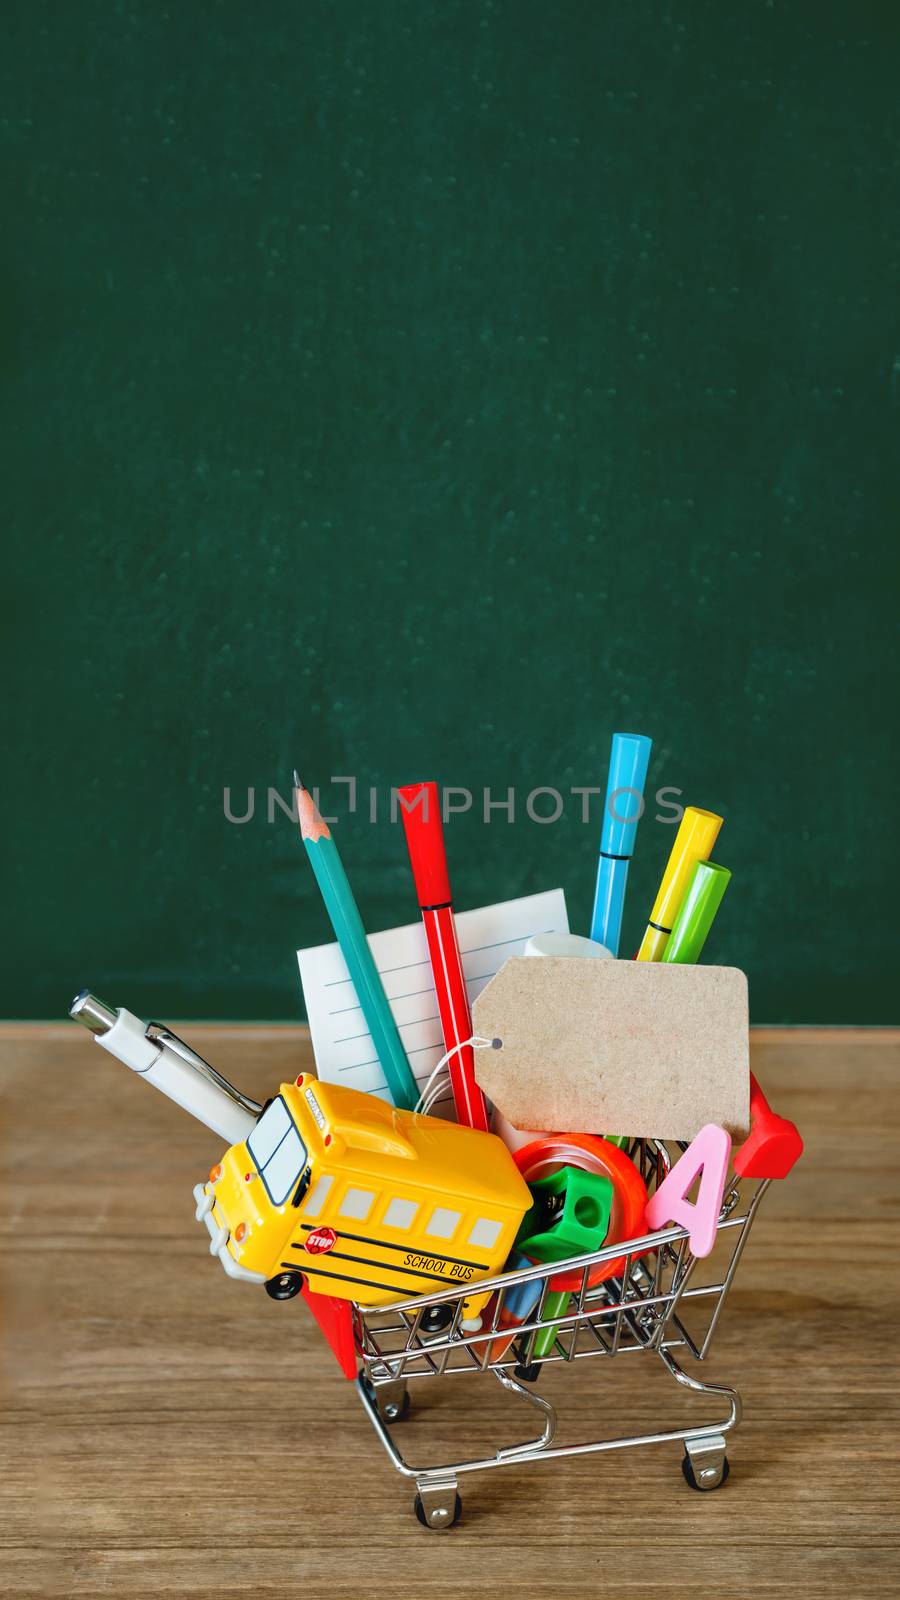 Colorful stationery and school bus model in shopping cart. Back to school concept. Vertical green blackboard background with copy space on tag. 9-16 ratio for mobile applications.